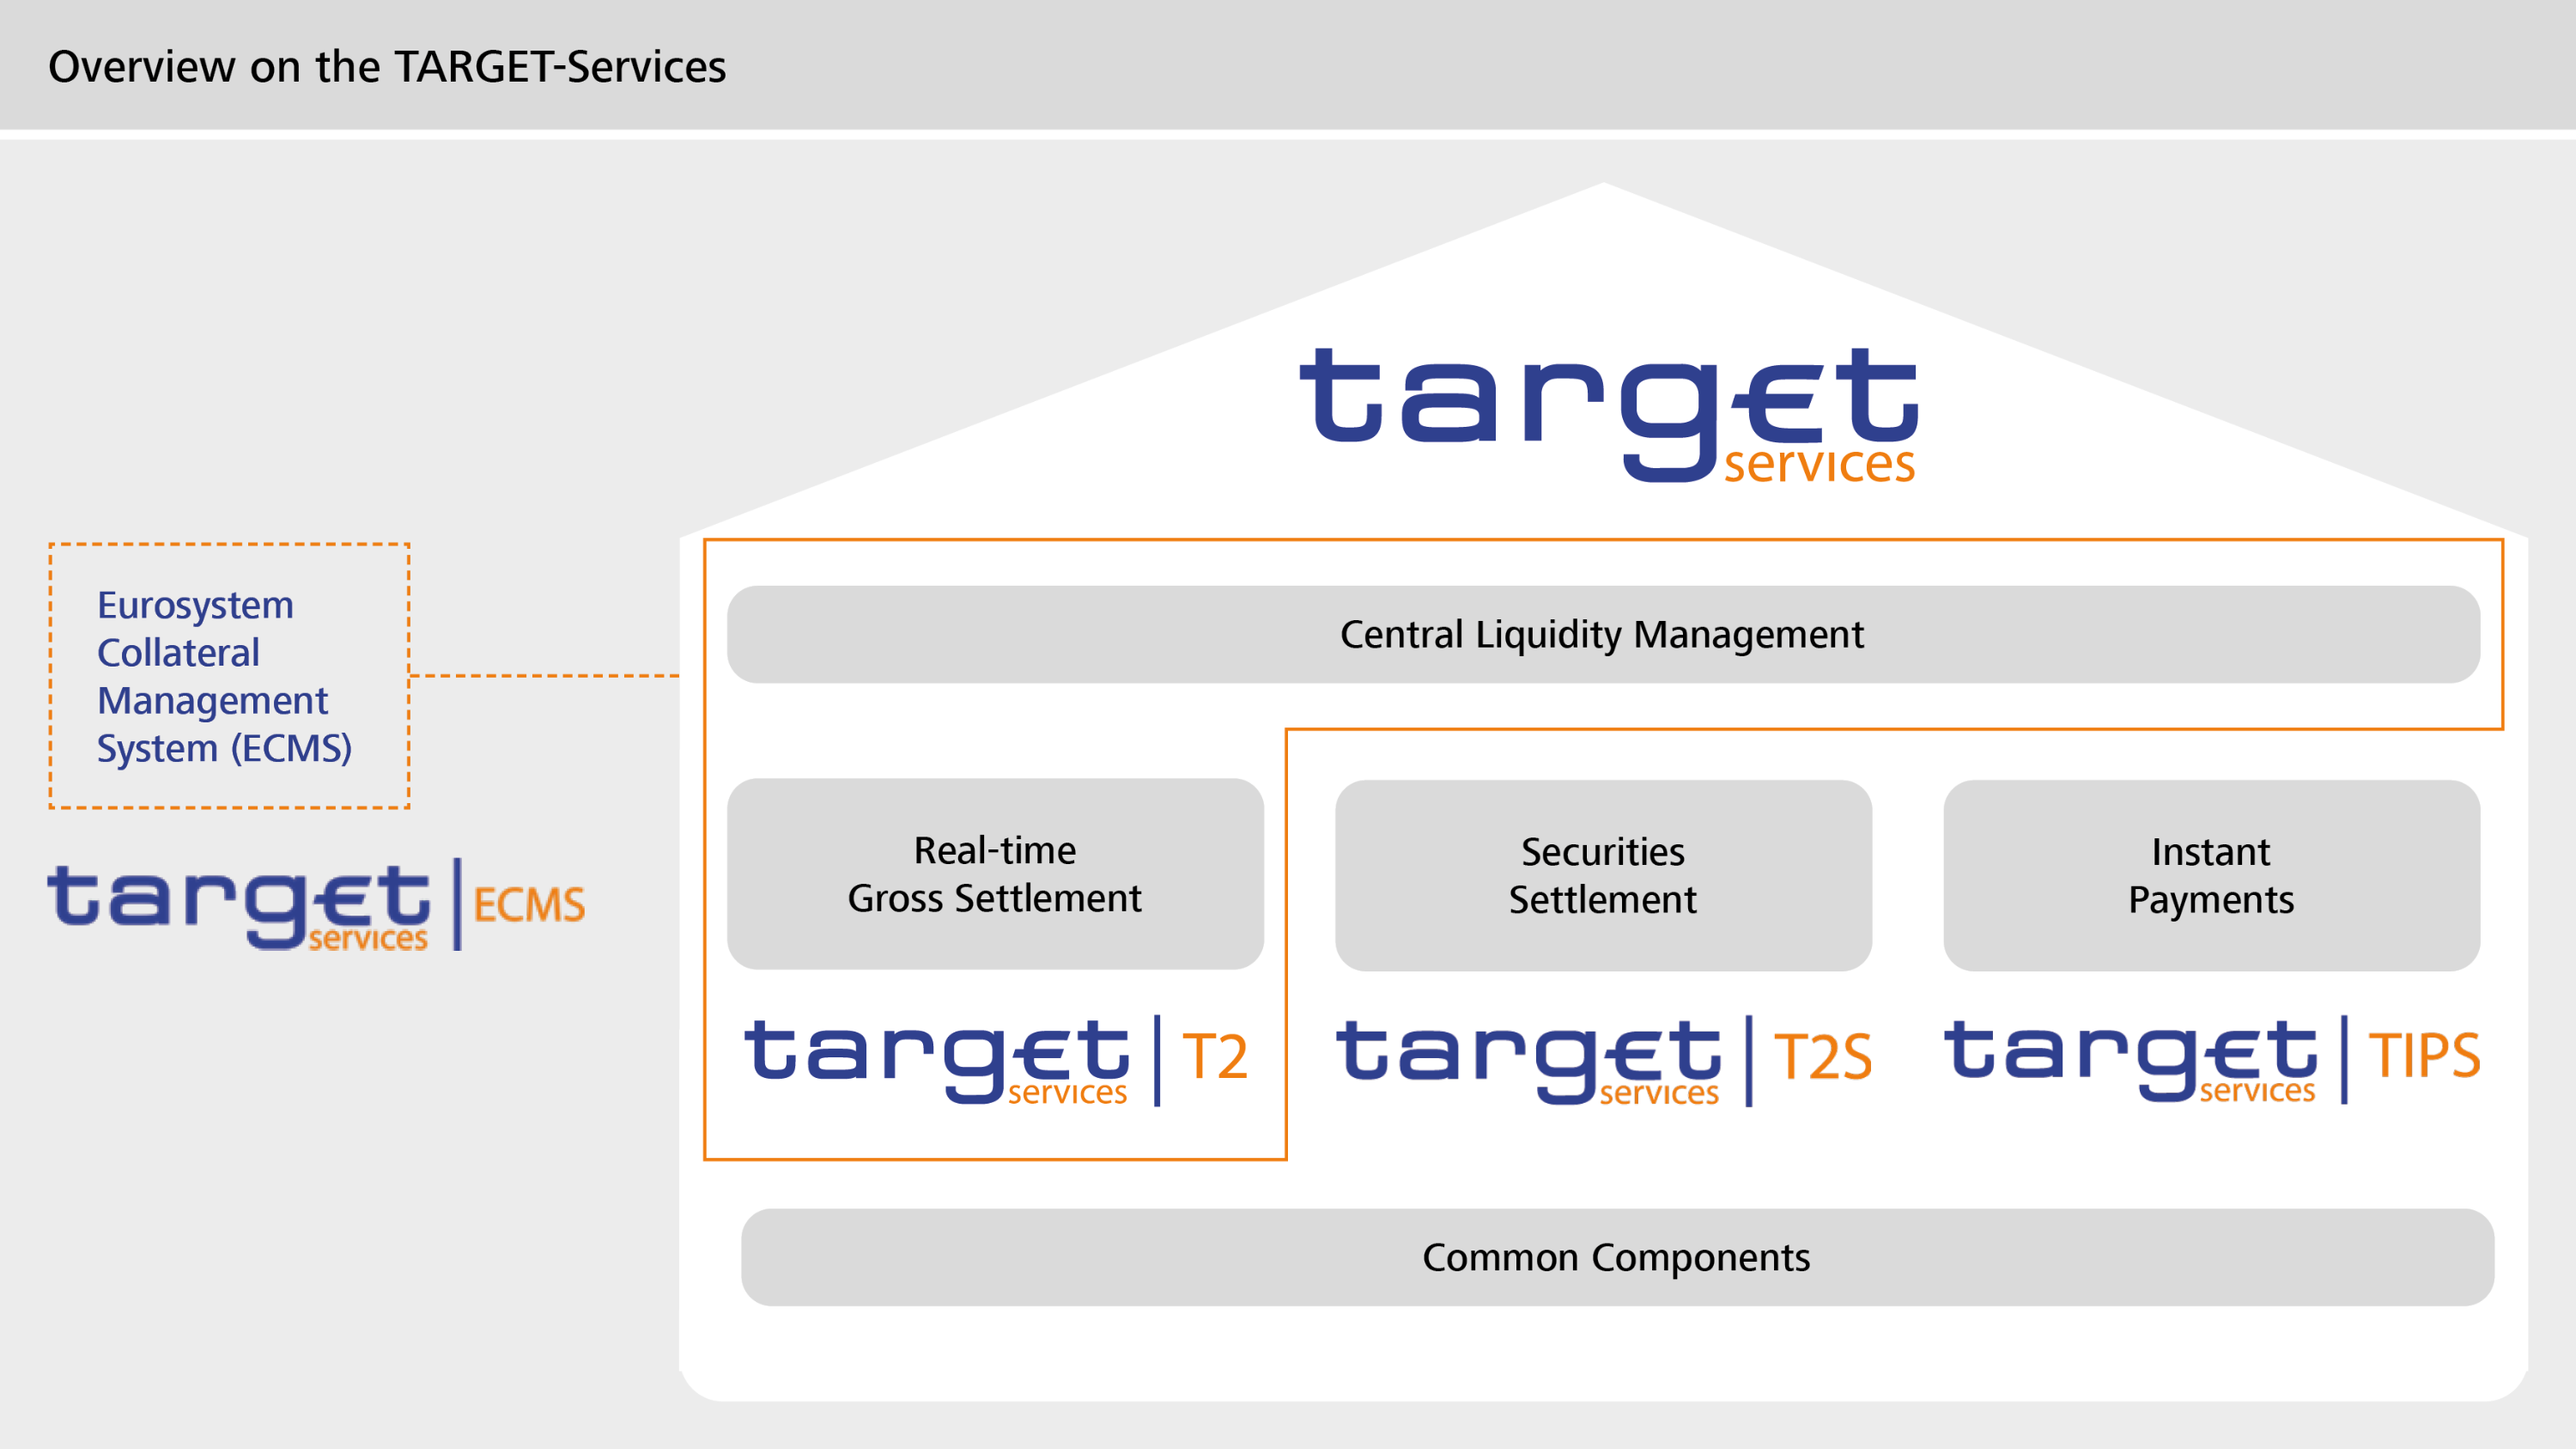 Overview on the TARGET services